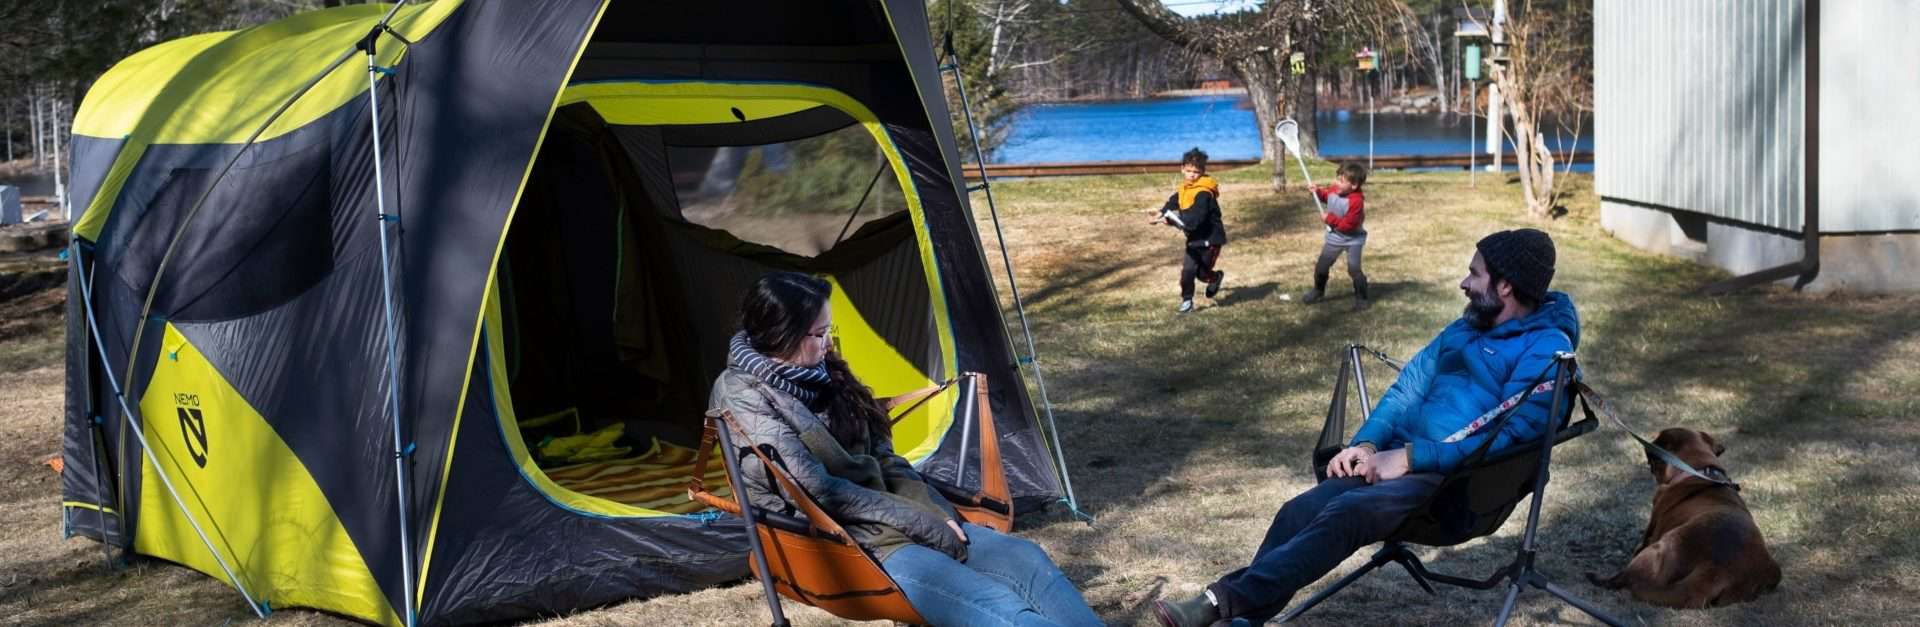 The Nemo Wagontop is the best family tent. The image shows kids playing outdoors on a family camping trip.